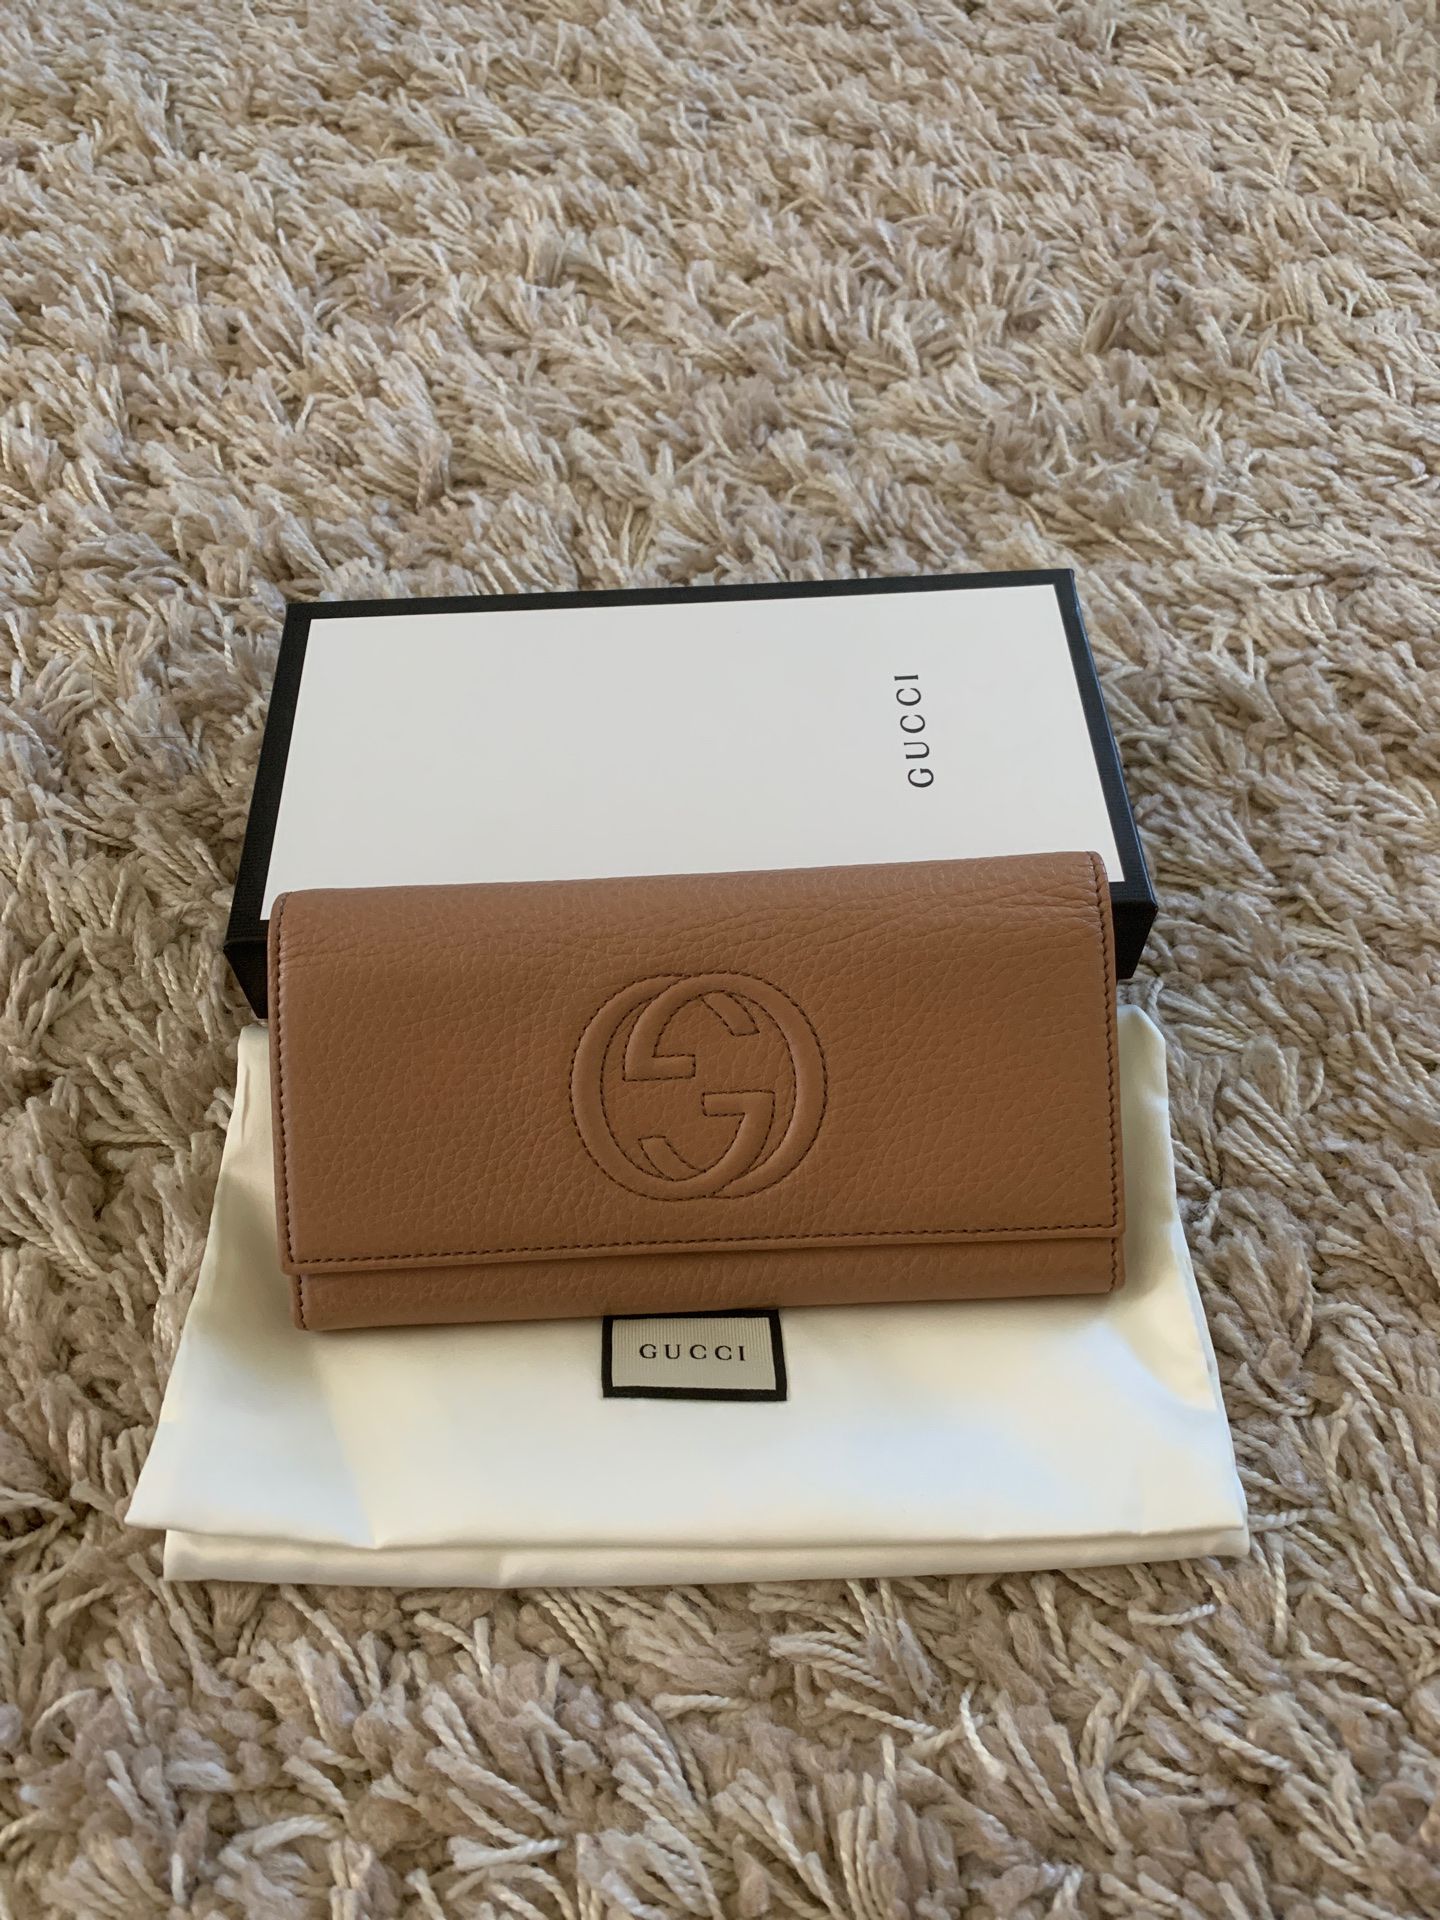 New authentic Gucci wallet